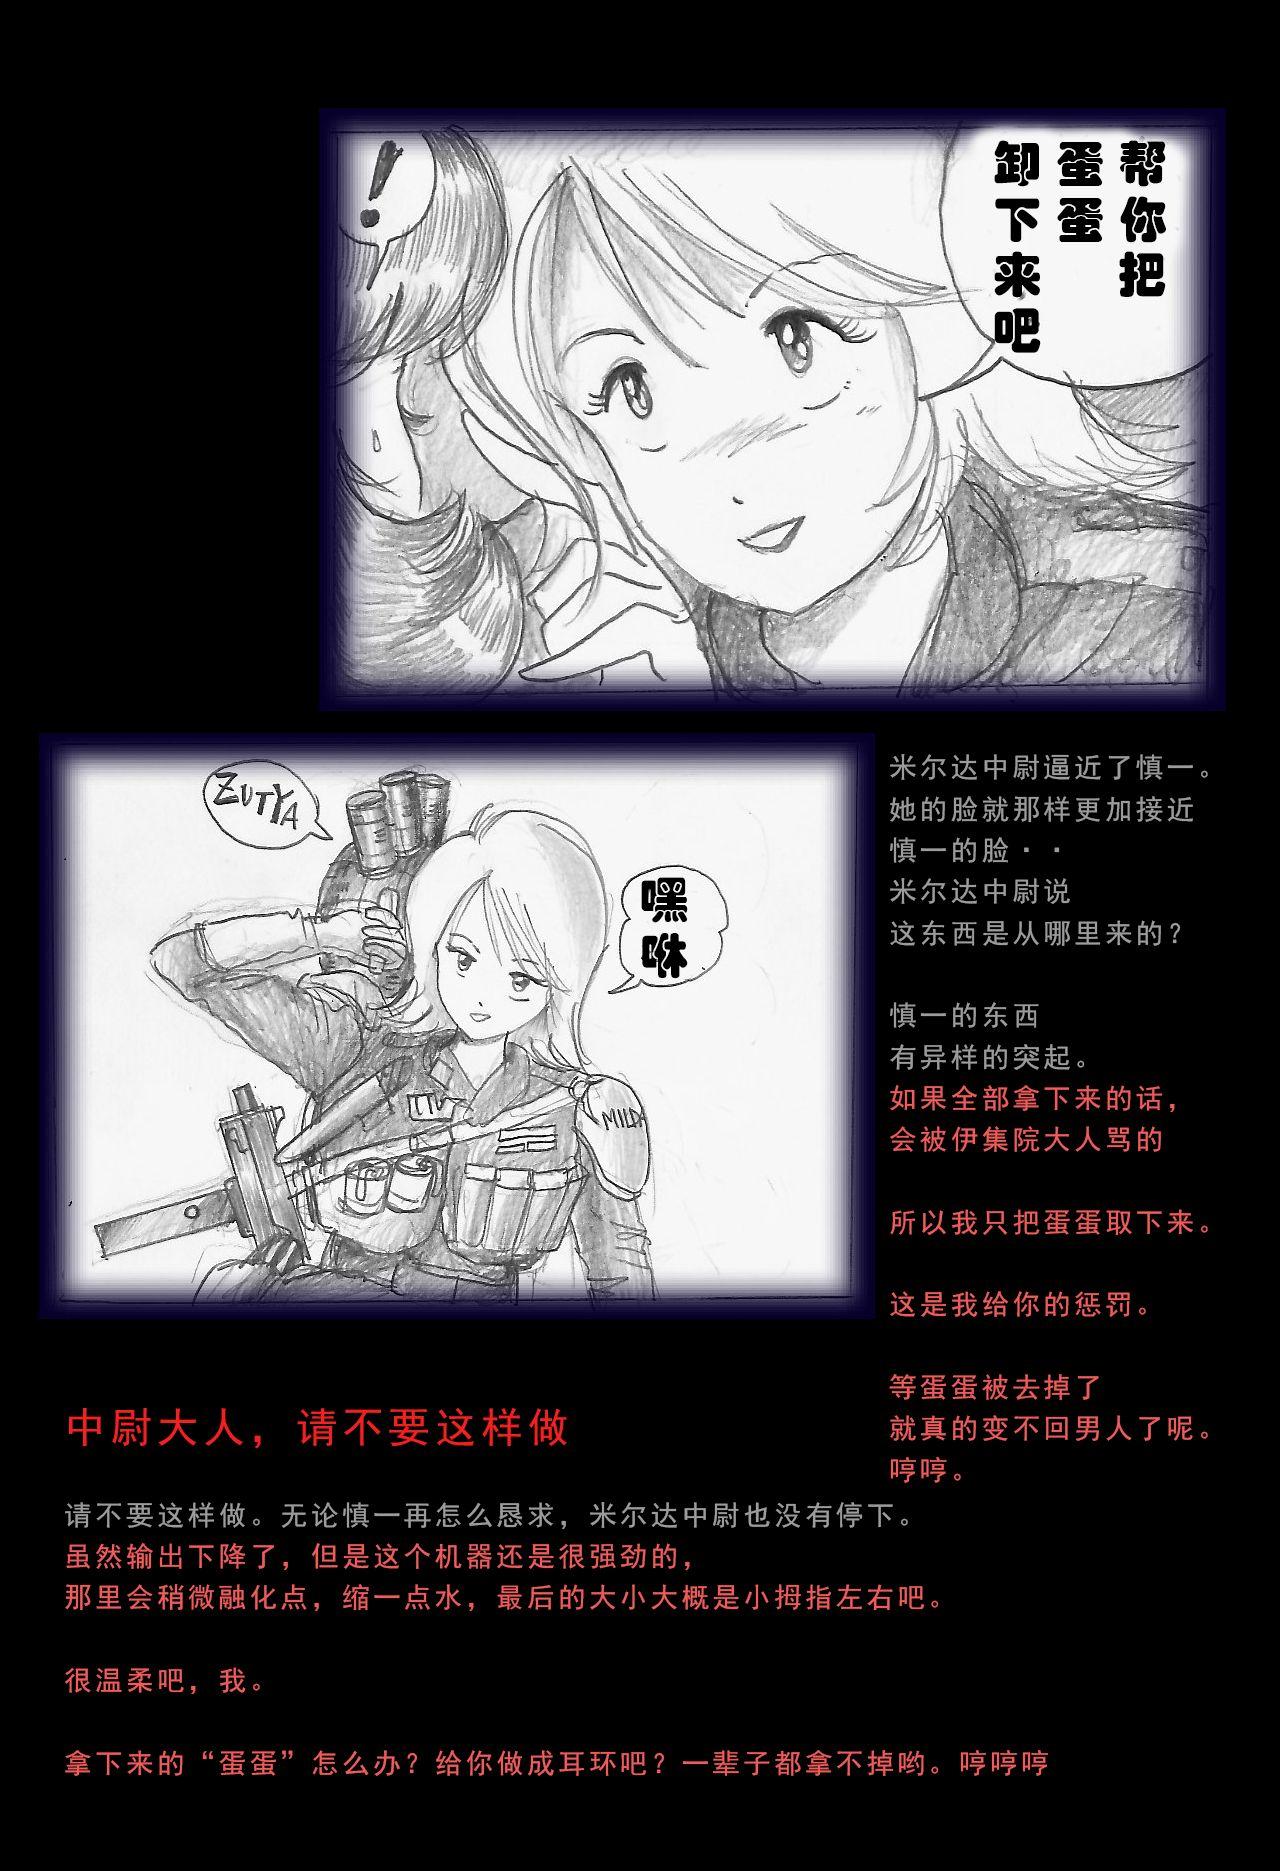 Special Police Third Platoon Captain Abduction Restraint Edition【chinese】 20